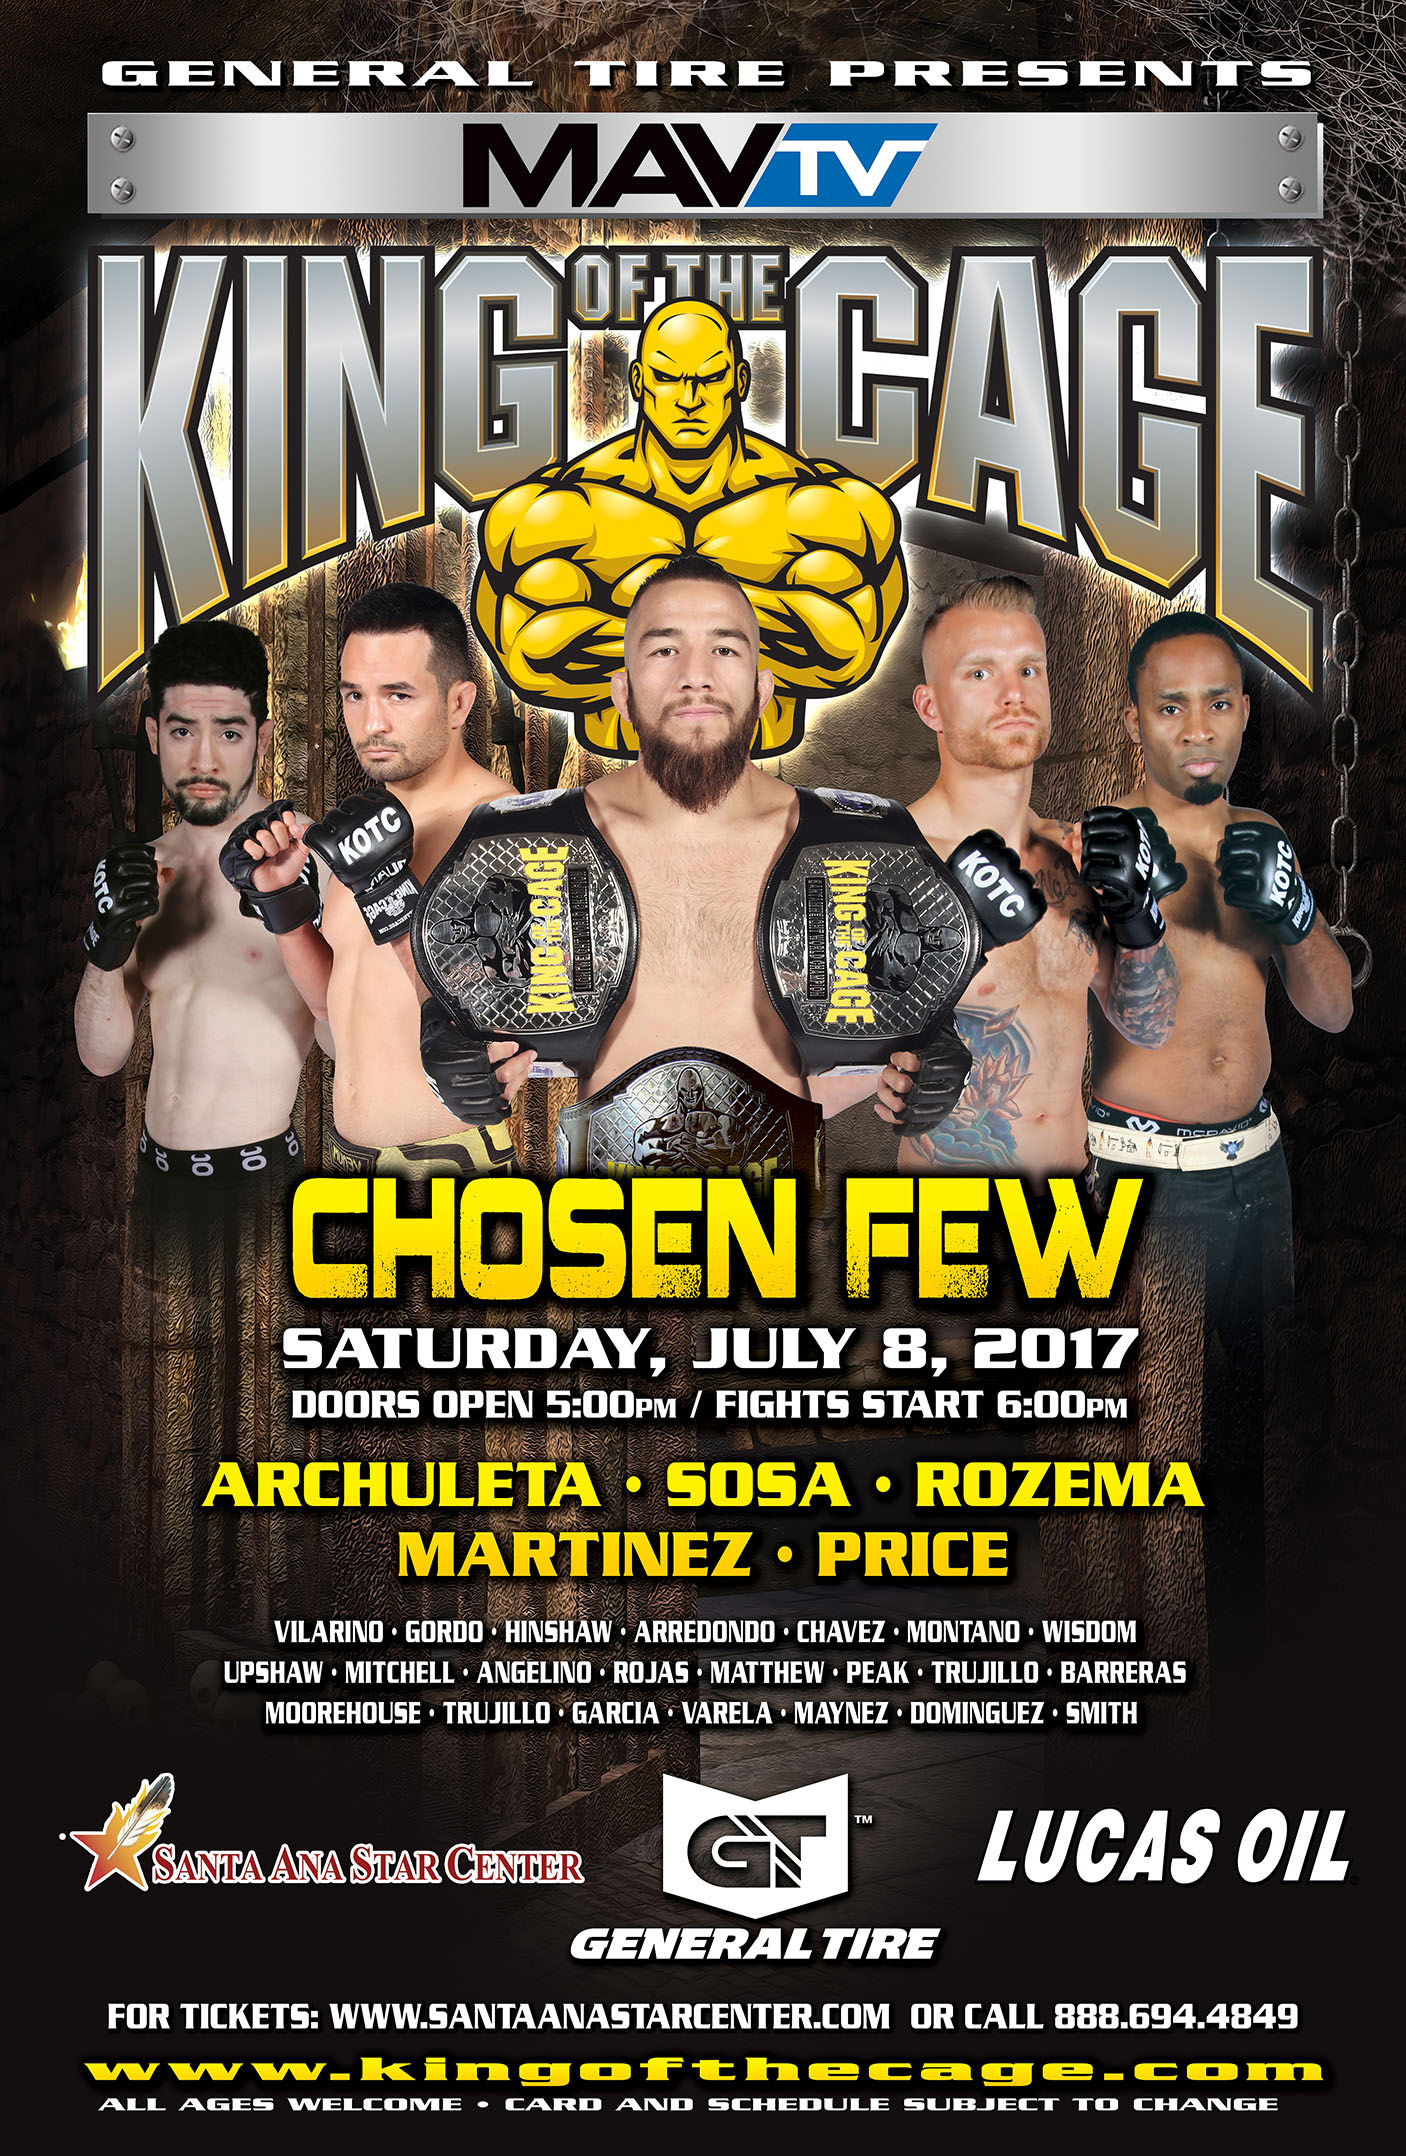 King of the Cage Returns to Santa Ana Star Center on July 8 for “CHOSEN FEW”